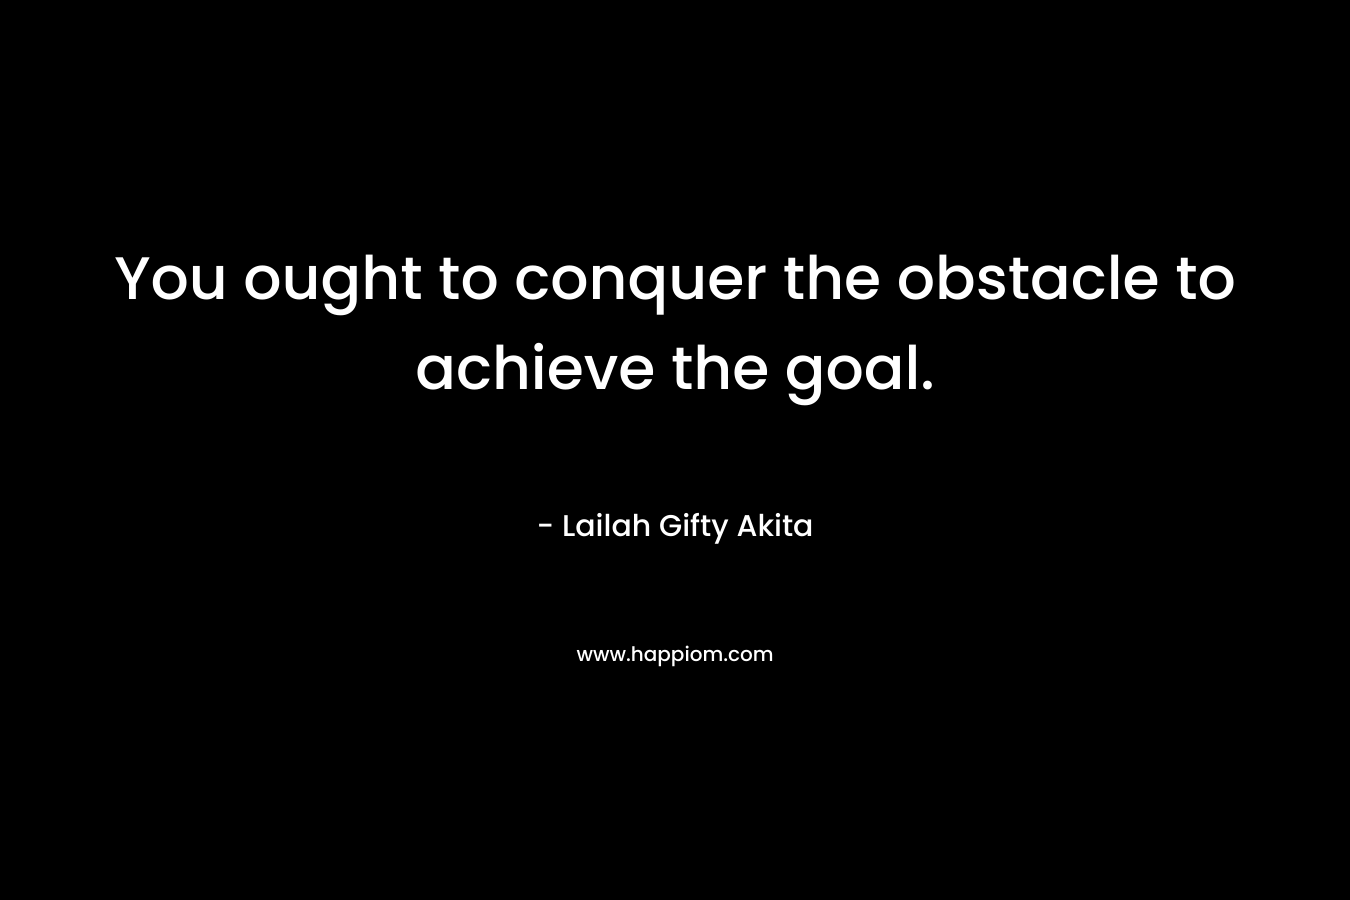 You ought to conquer the obstacle to achieve the goal.